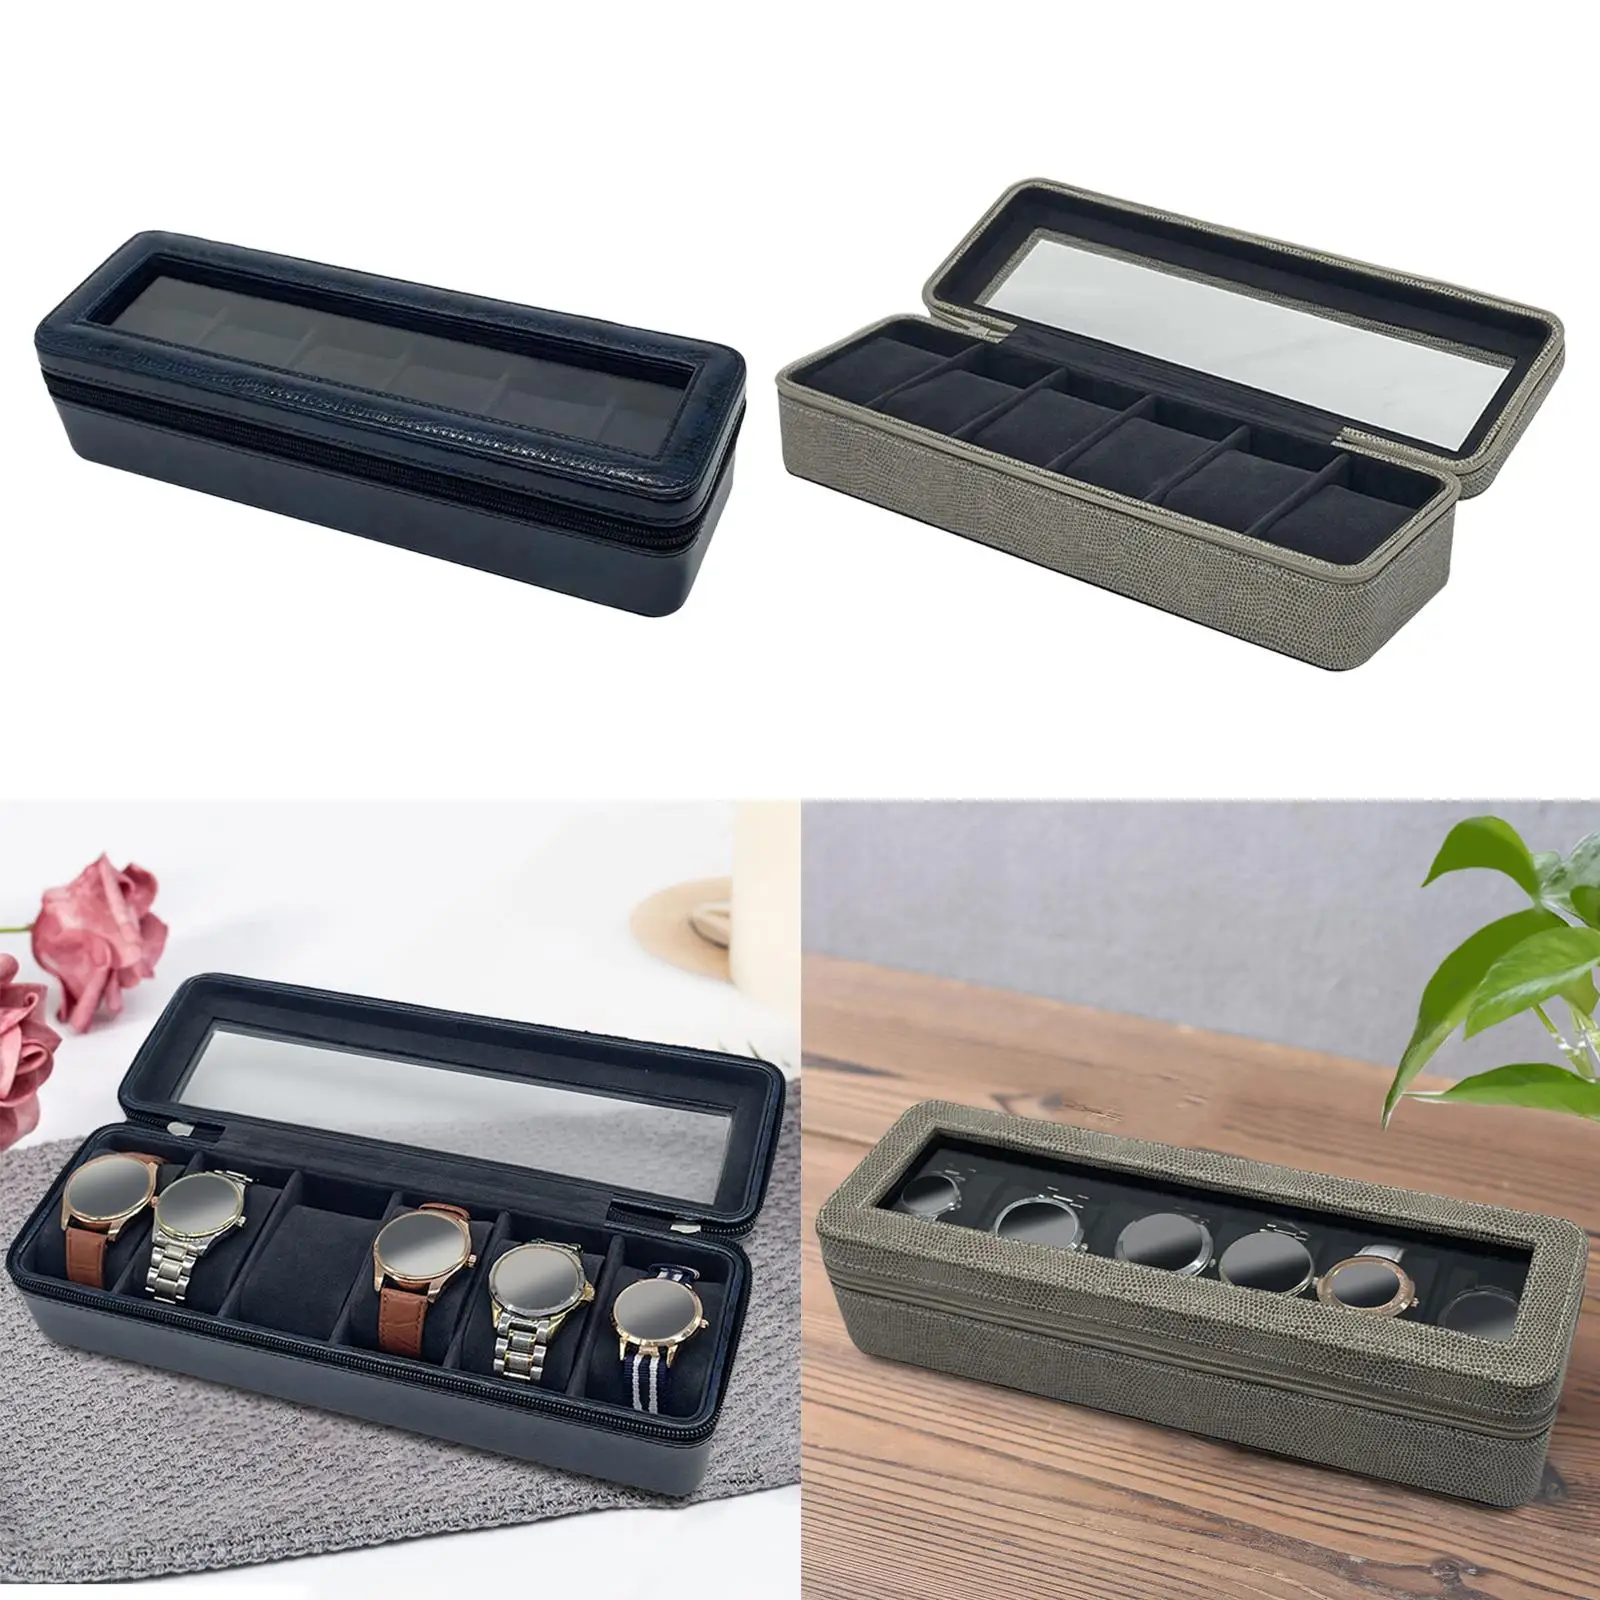 Watch Box Showcase with Lid Fits All Wristwatches Large for Men and Women